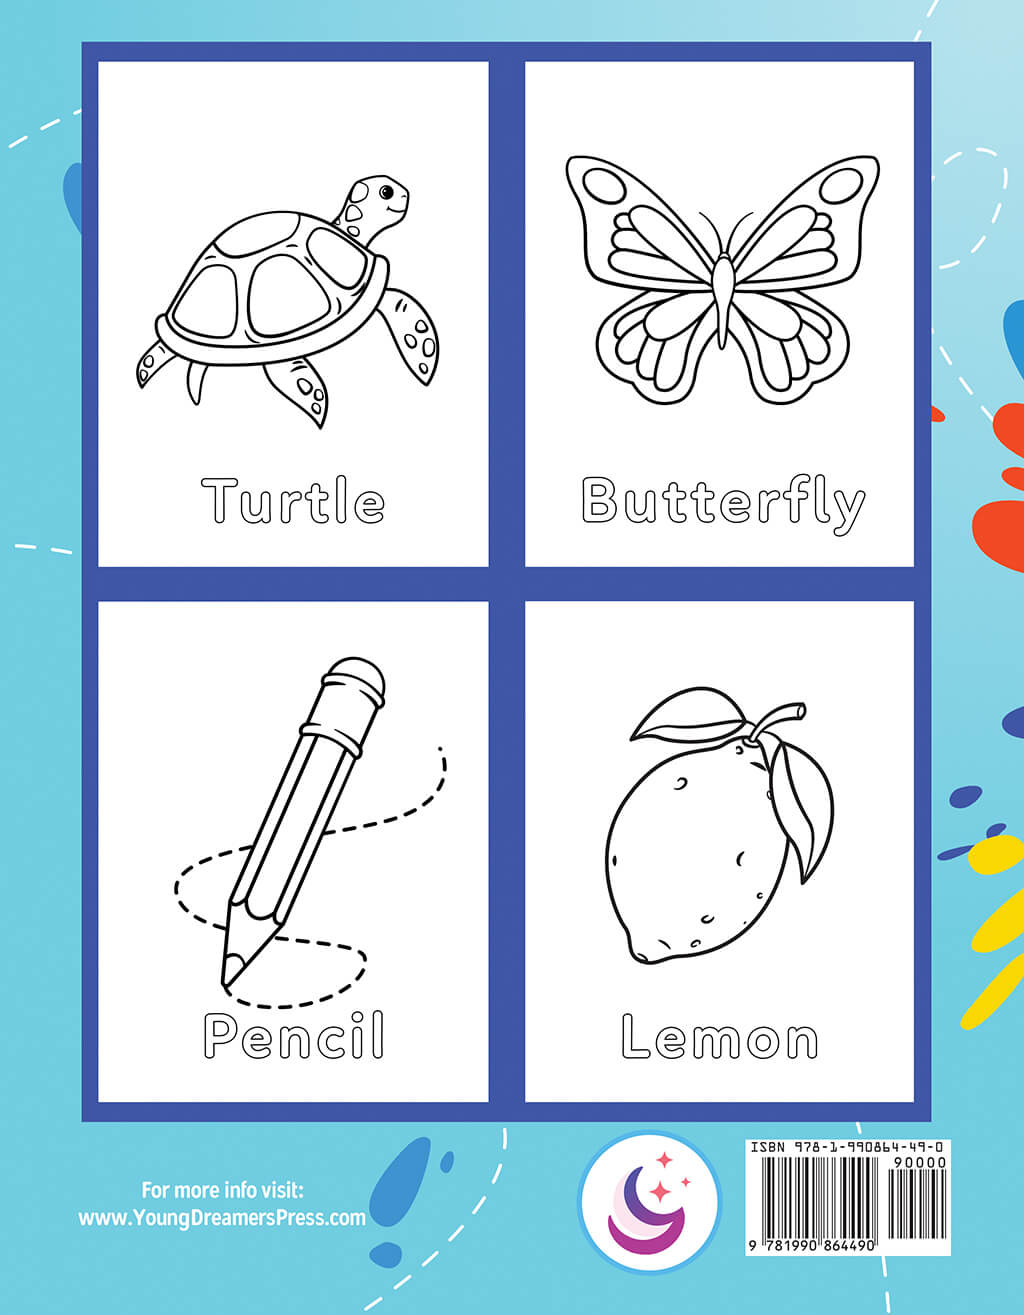 Coloring Book for Toddler